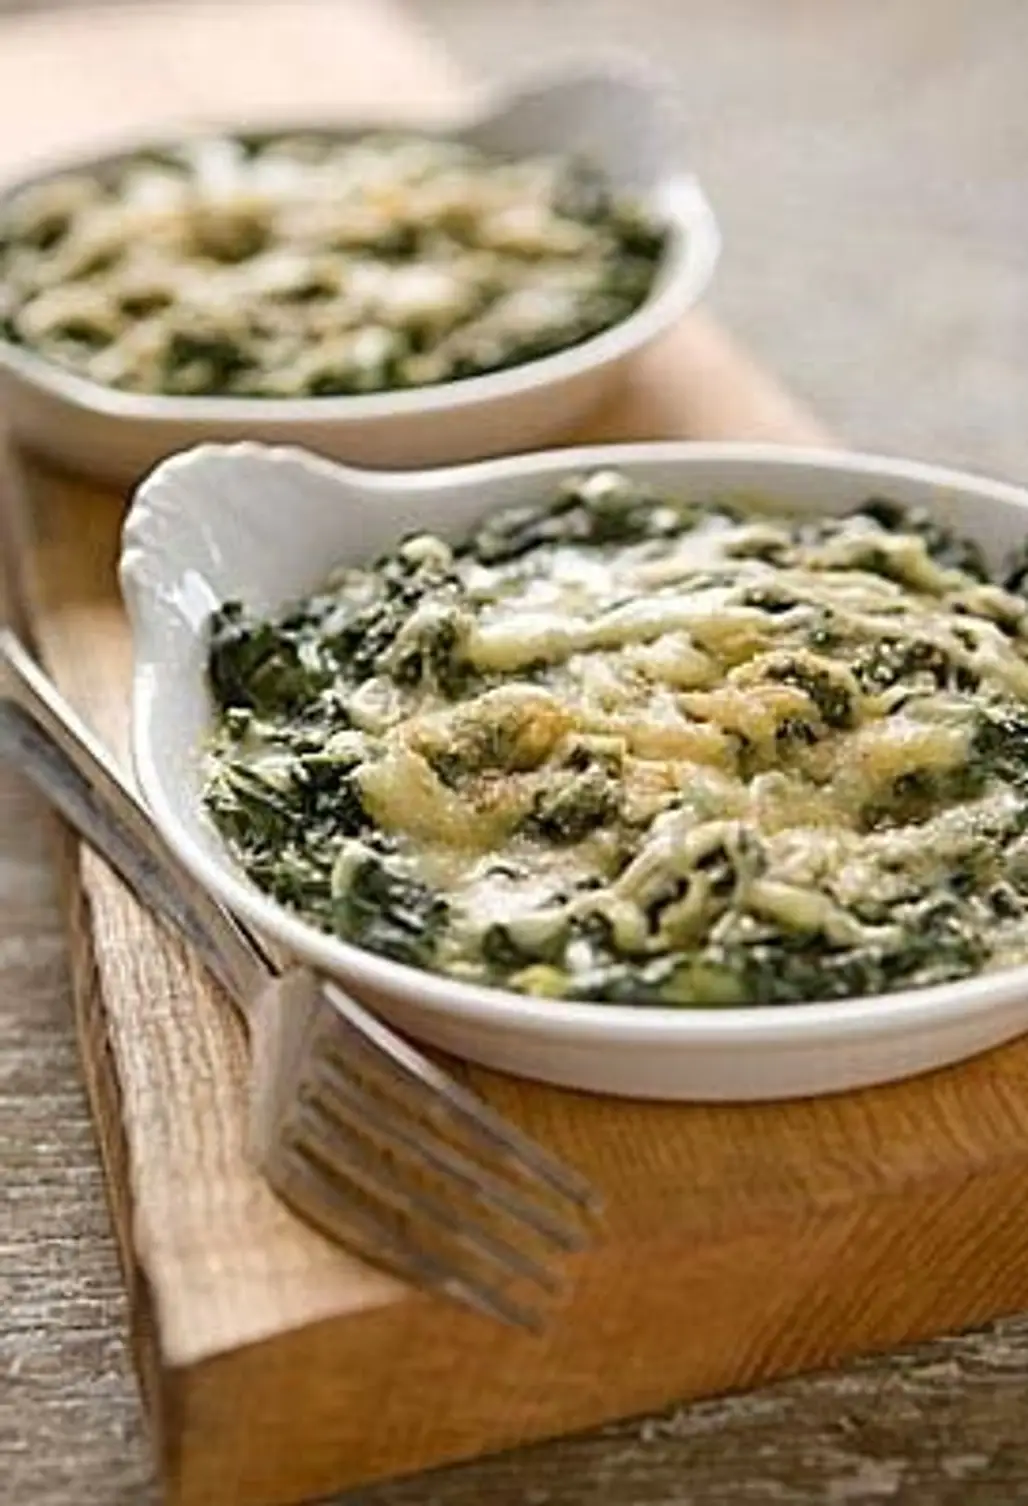 A Simple White Sauce Lightly Coats Swiss Chard Leaves